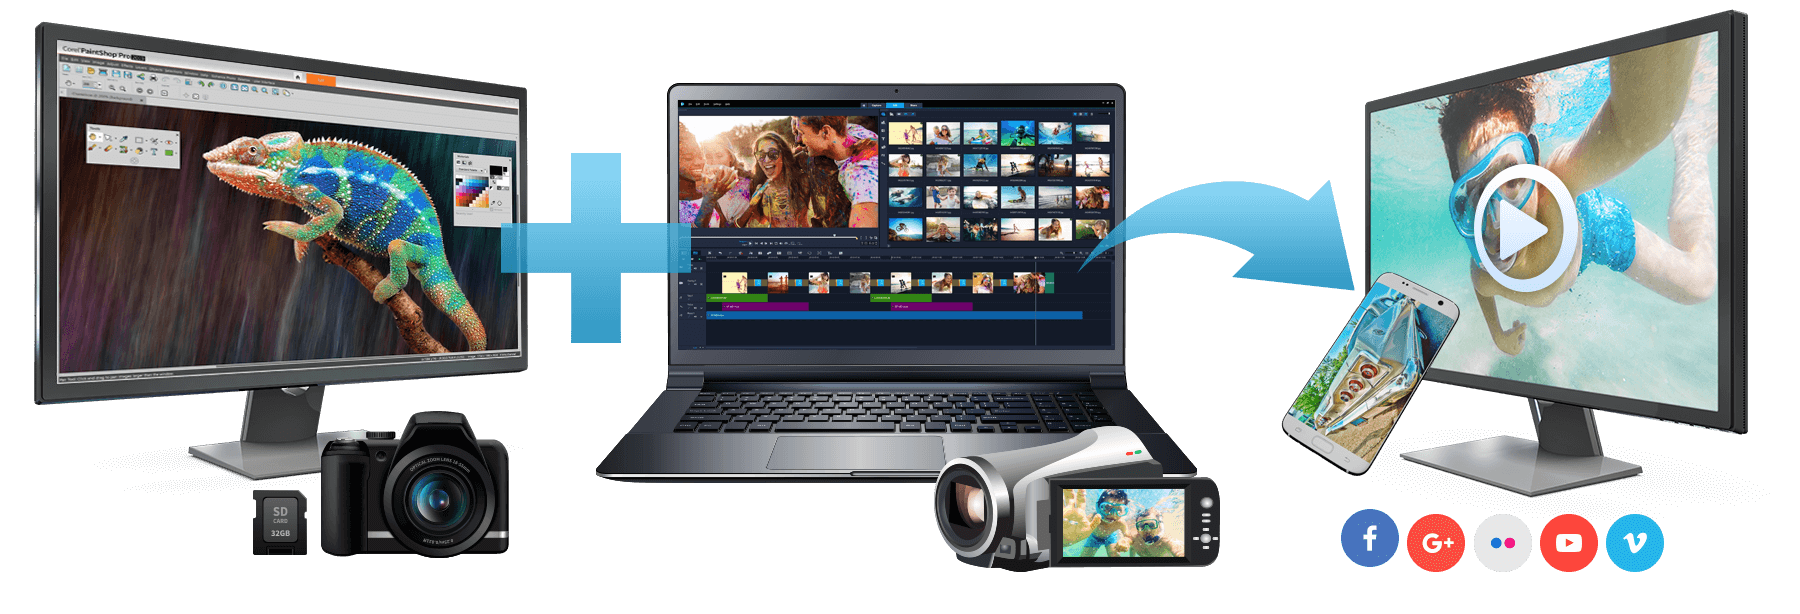 Photo And Video Editing Software Corel Photo Video Bundle